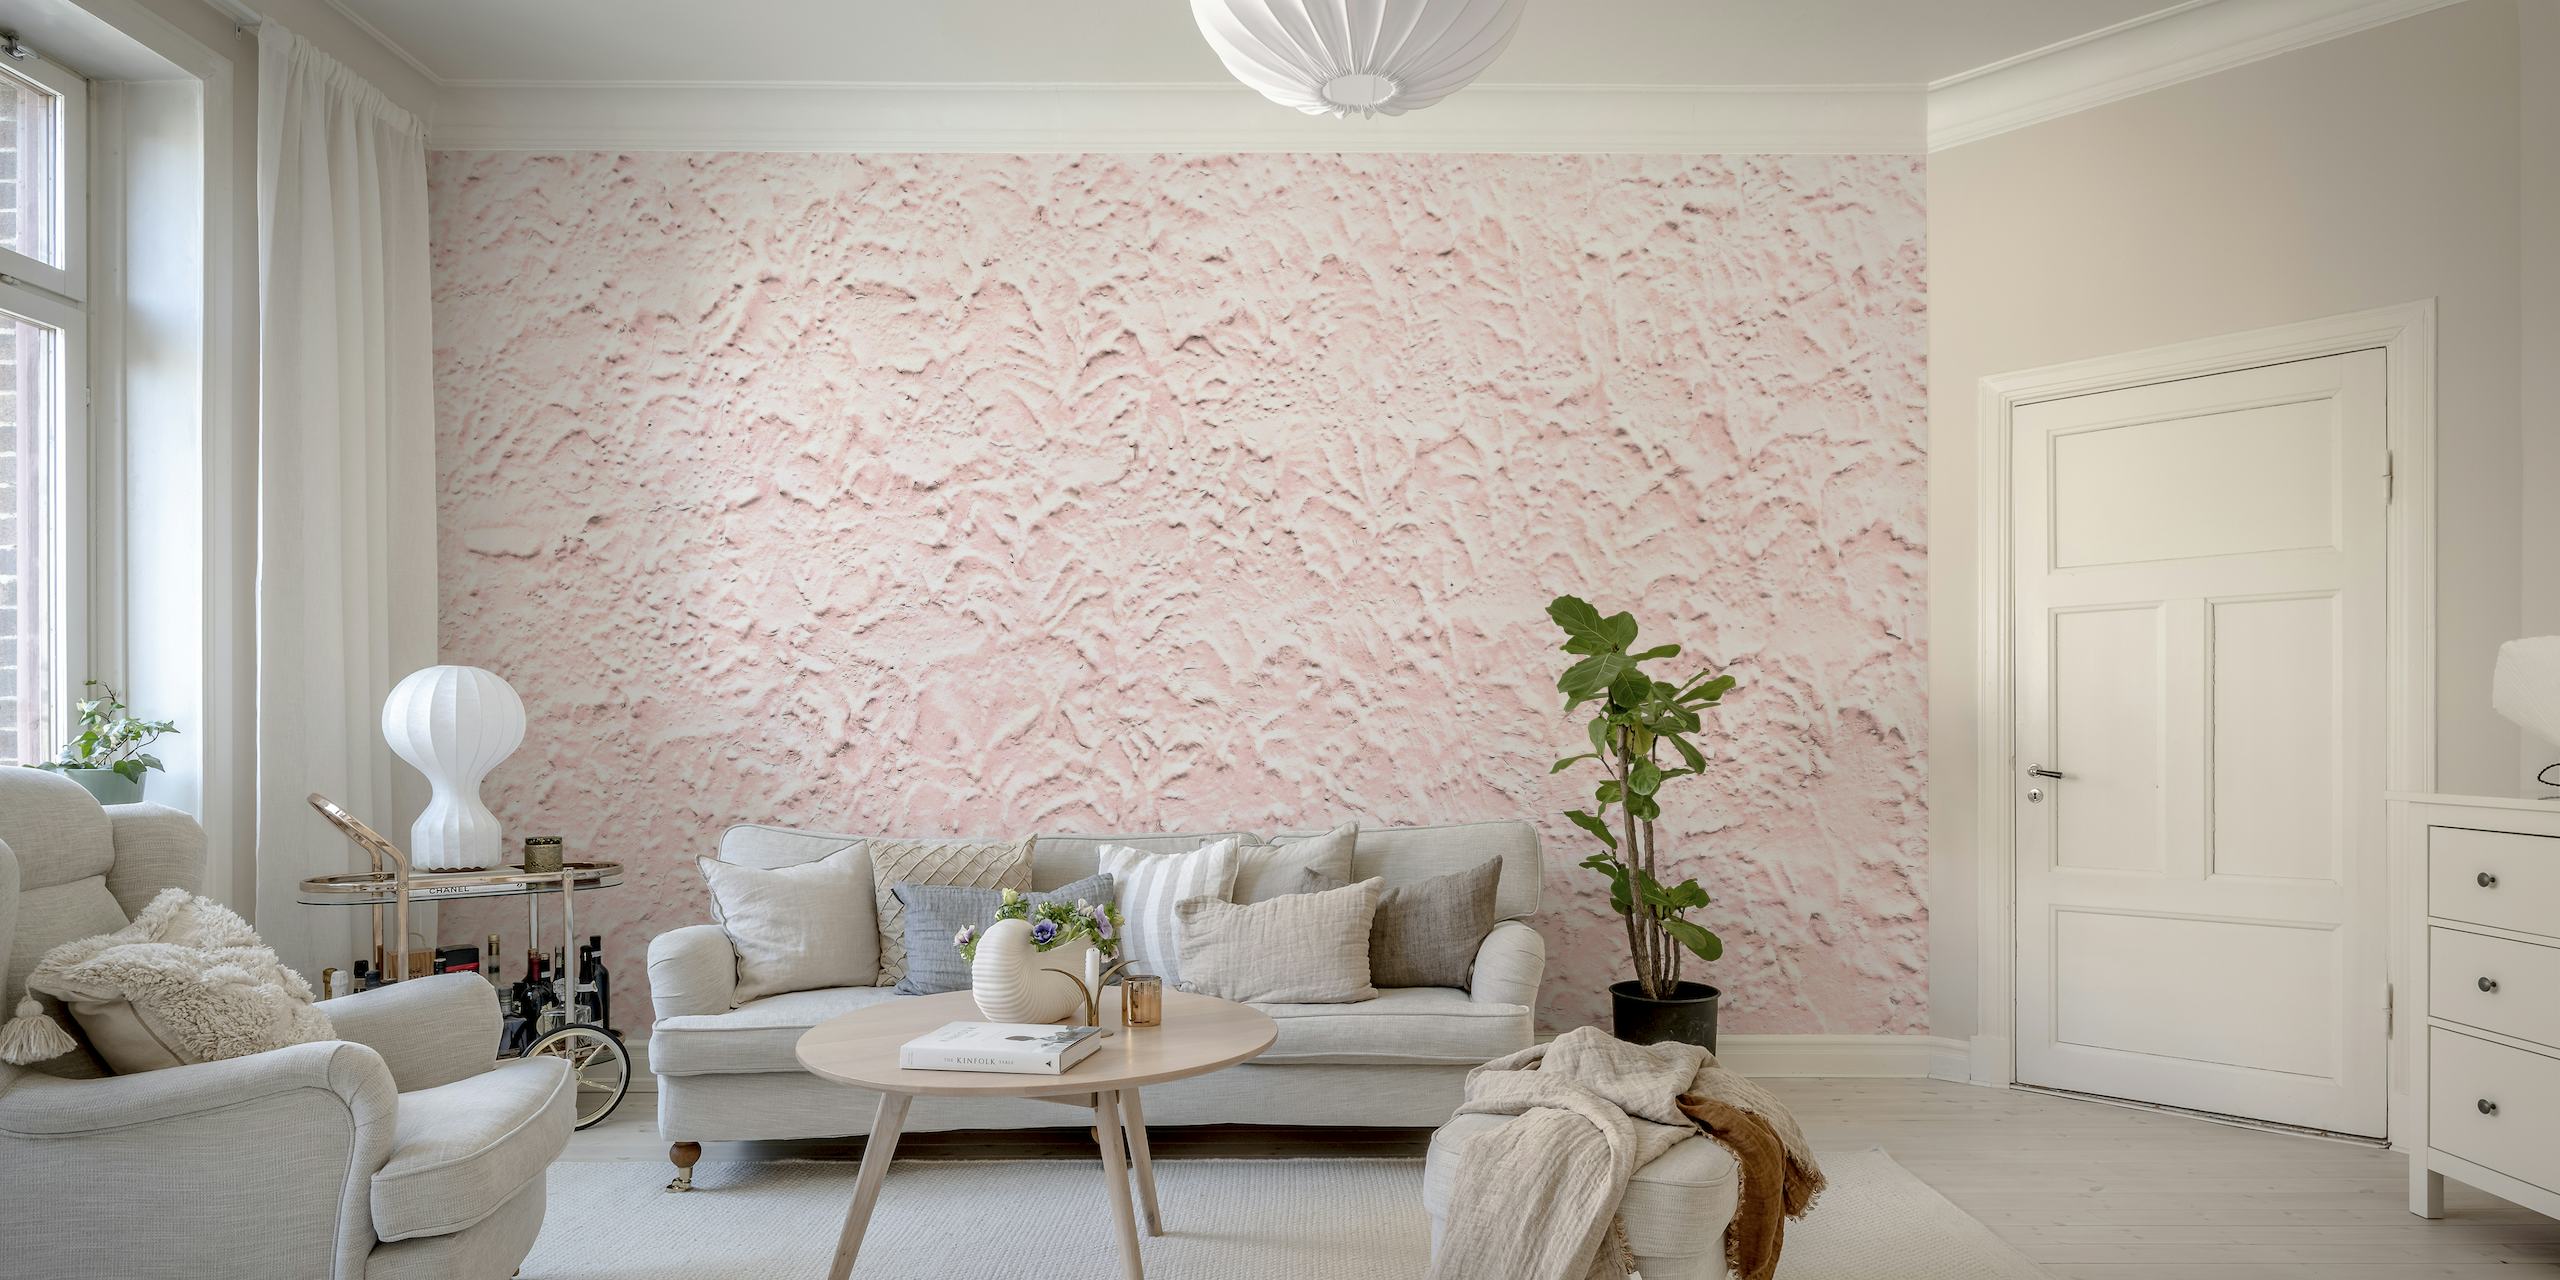 High-quality Blush Pink Cement Wallpaper for a luxurious home makeover